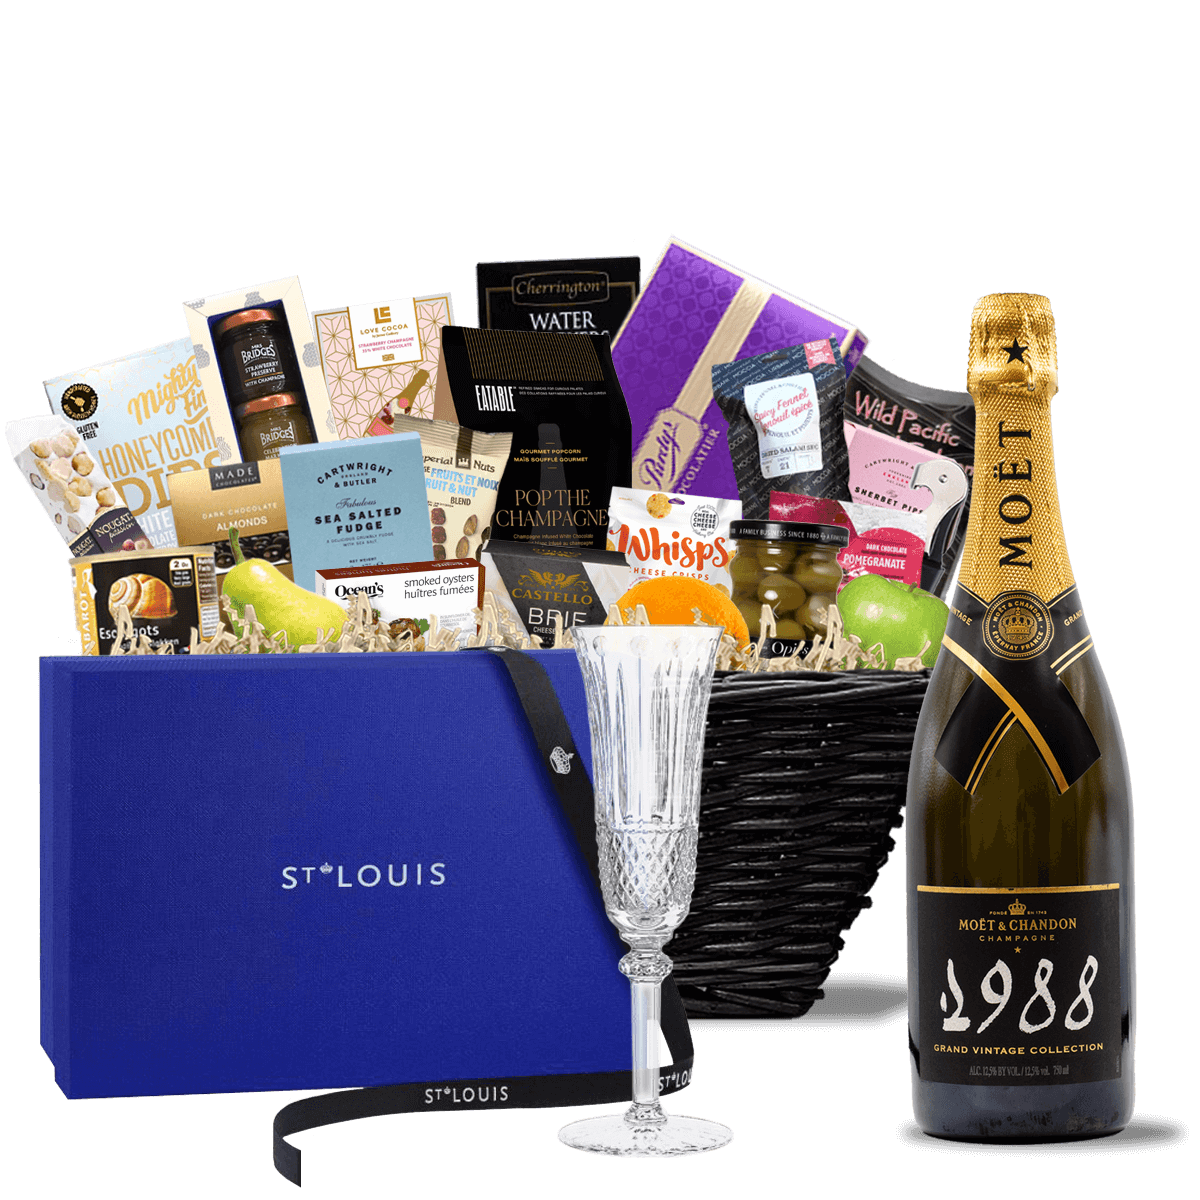 TAG Liquor Stores BC - Moet & Chandon 1988 Grand Vintage Champagne Ultra Luxe Gift Basket